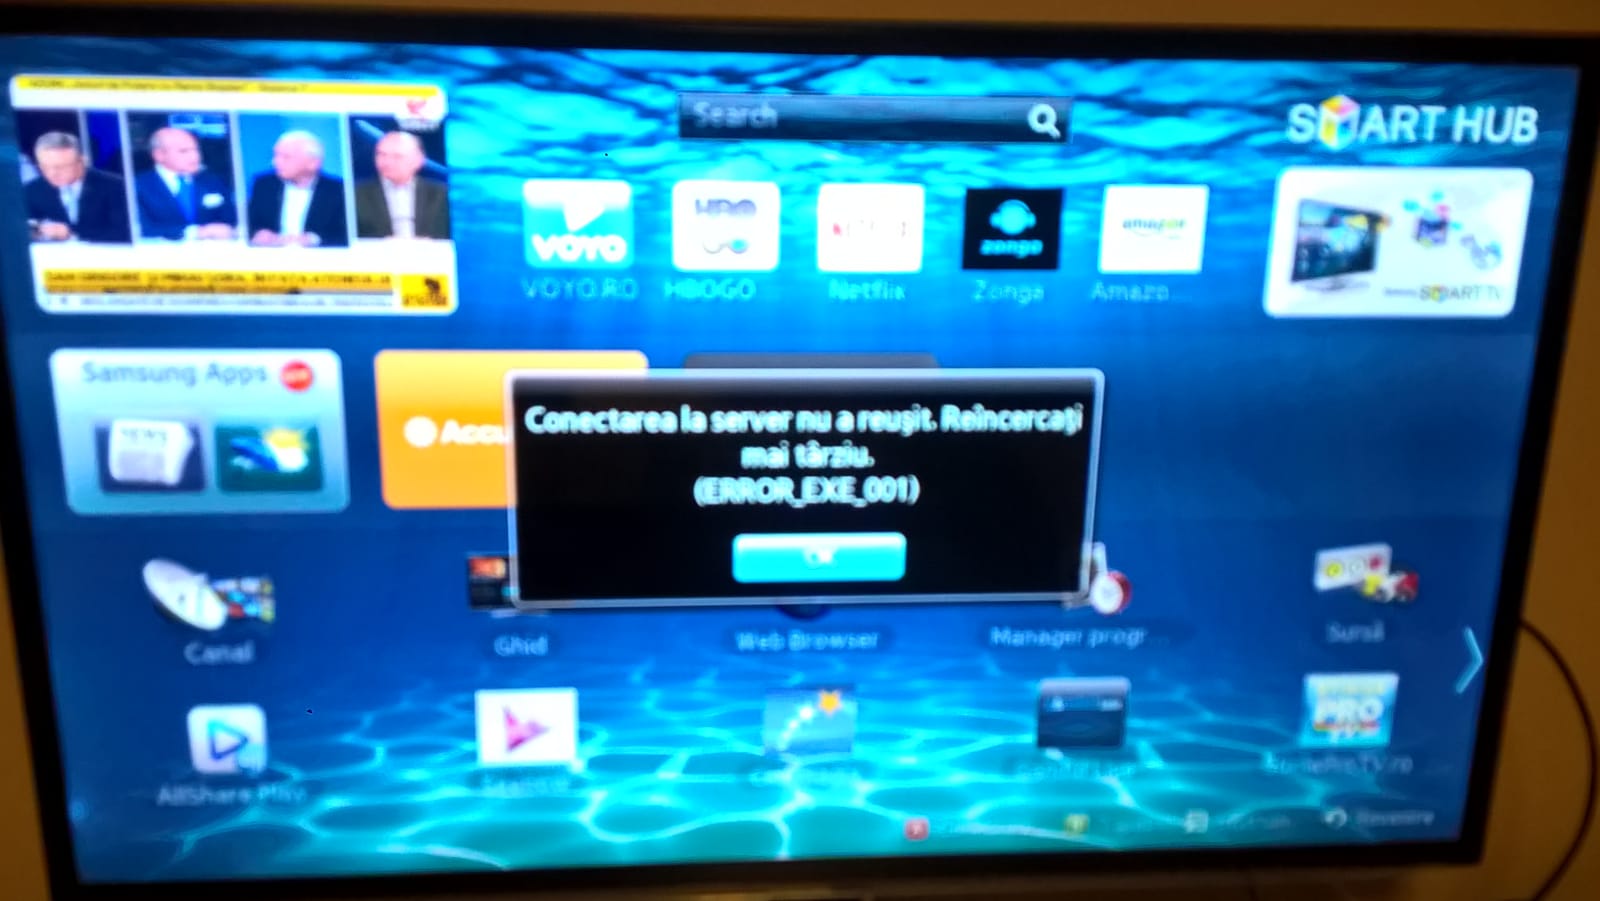 Solved My Smasung Tv Won T Connect To The Internet Error Exe 001 And Error Model Bind Tough The Network Status Is Fine Samsung Community